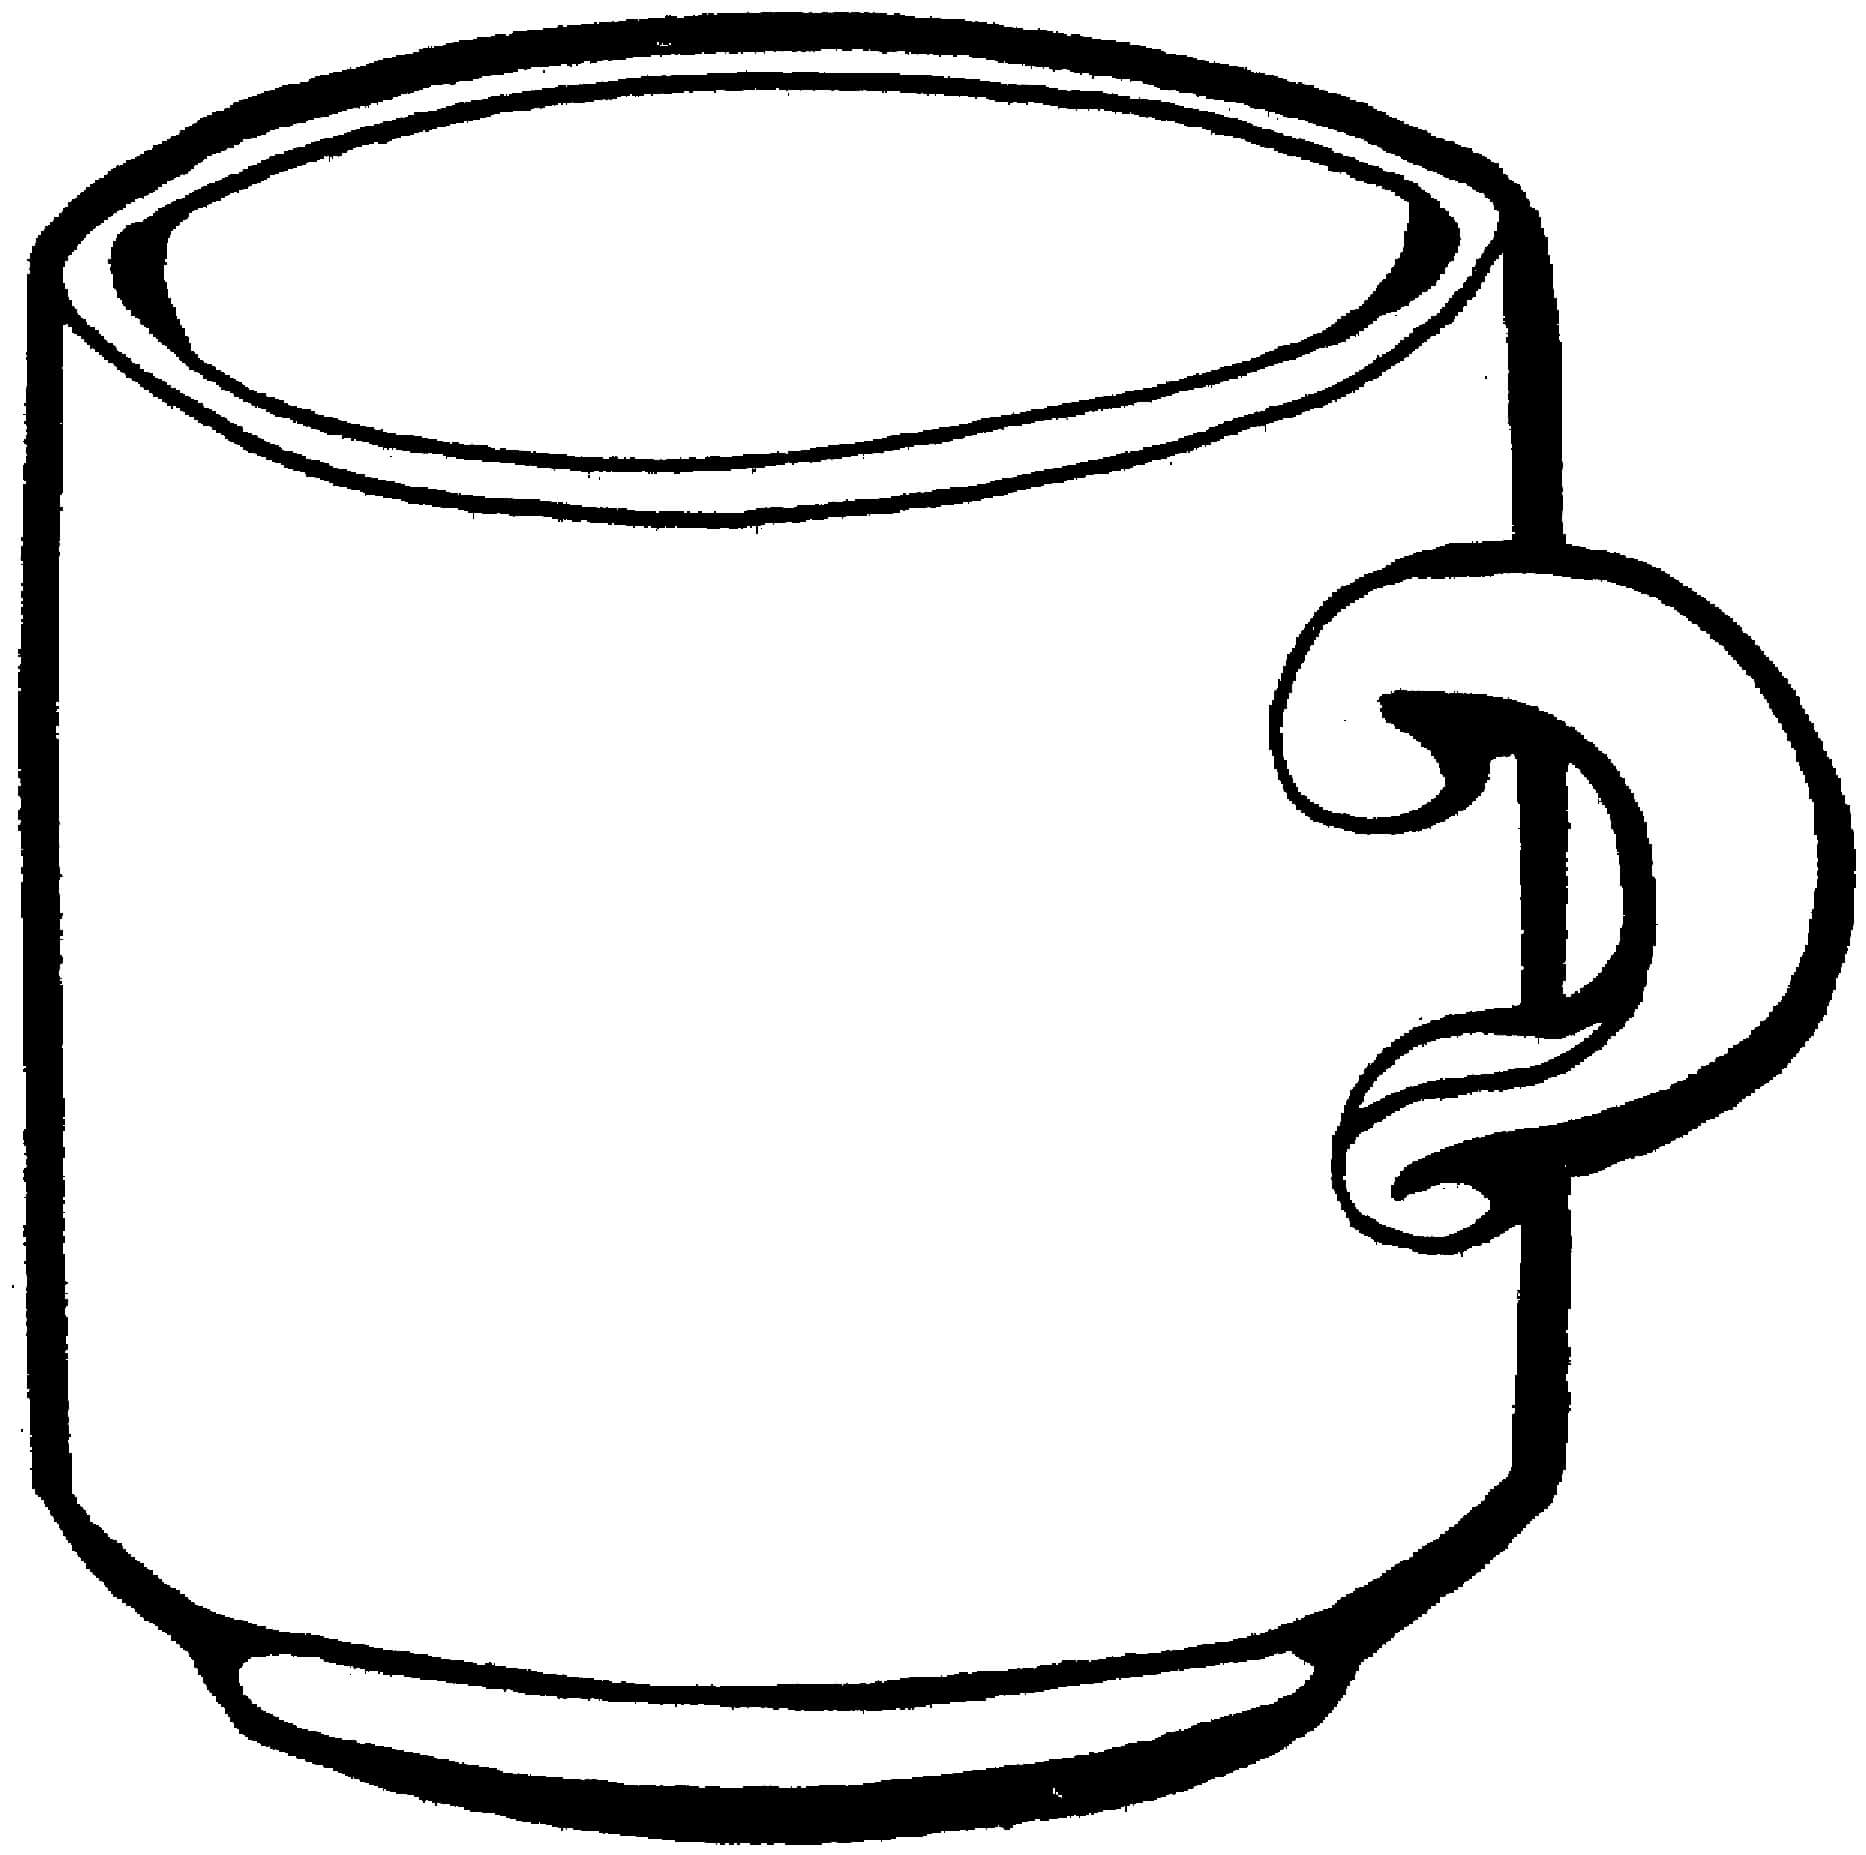 Coffee Mugs Coloring Pages